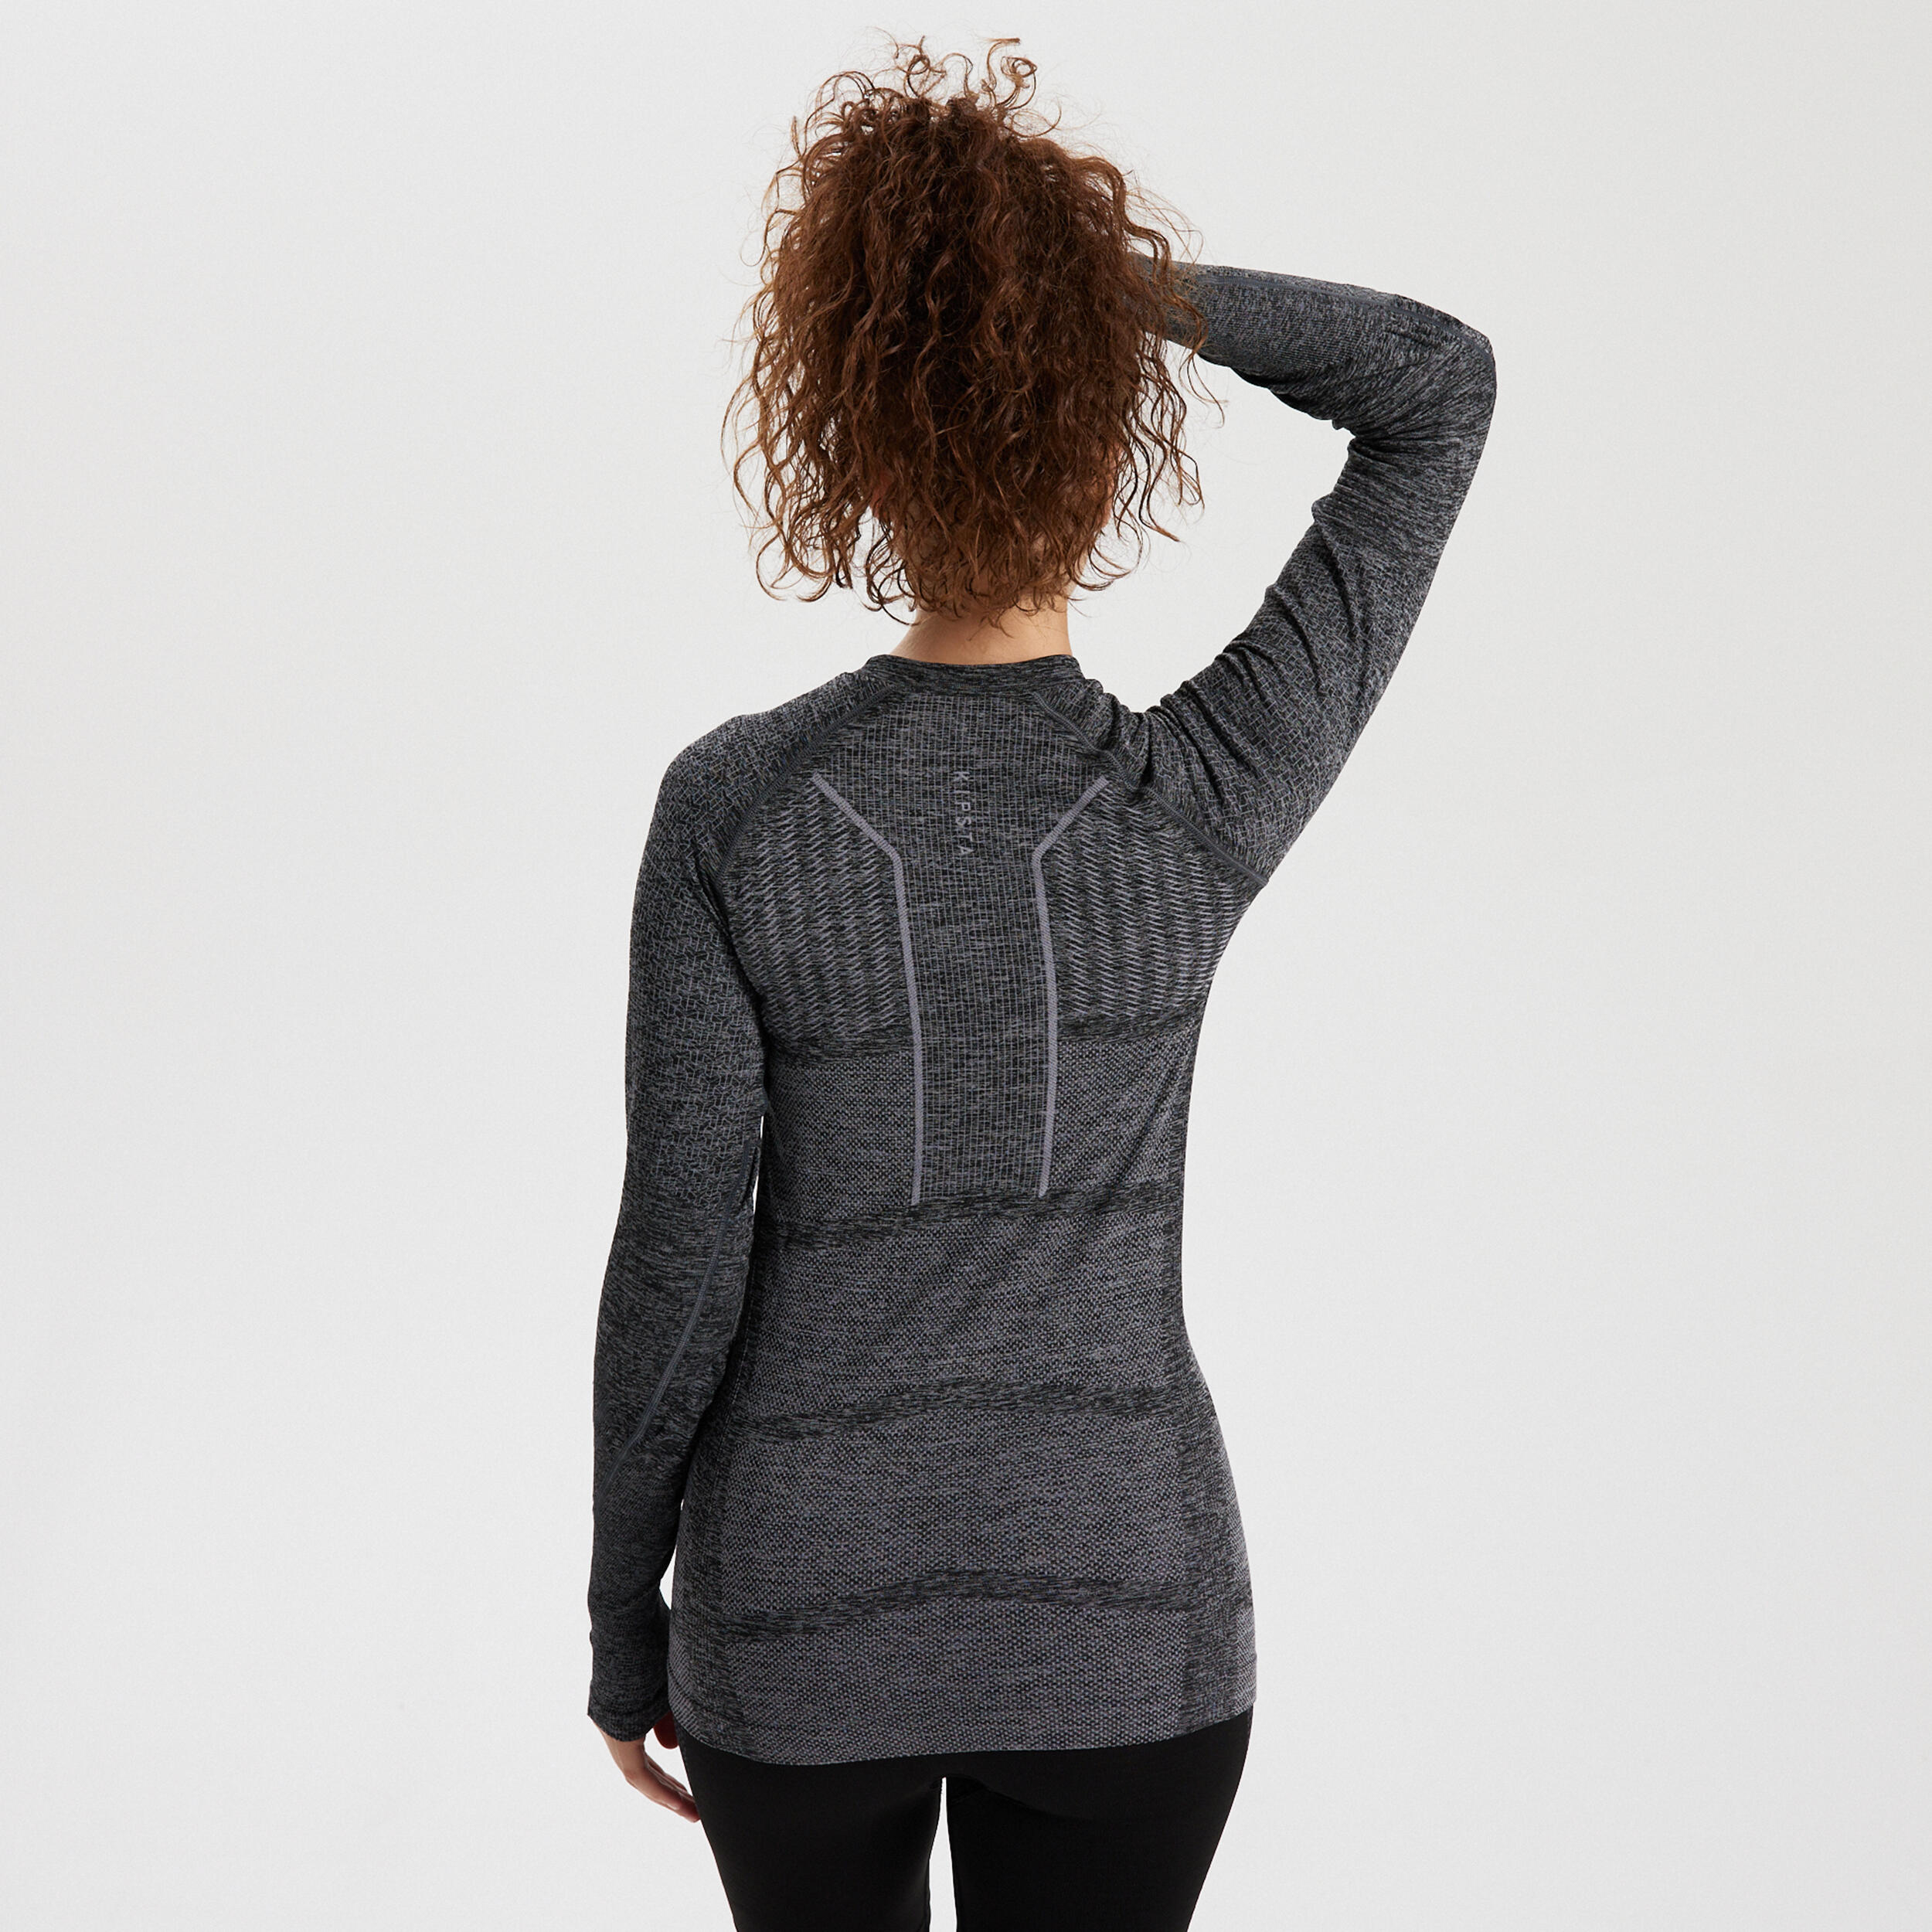 Adult Long-Sleeved Thermal Base Layer Top Keepdry 500 - Mottled Grey 3/10